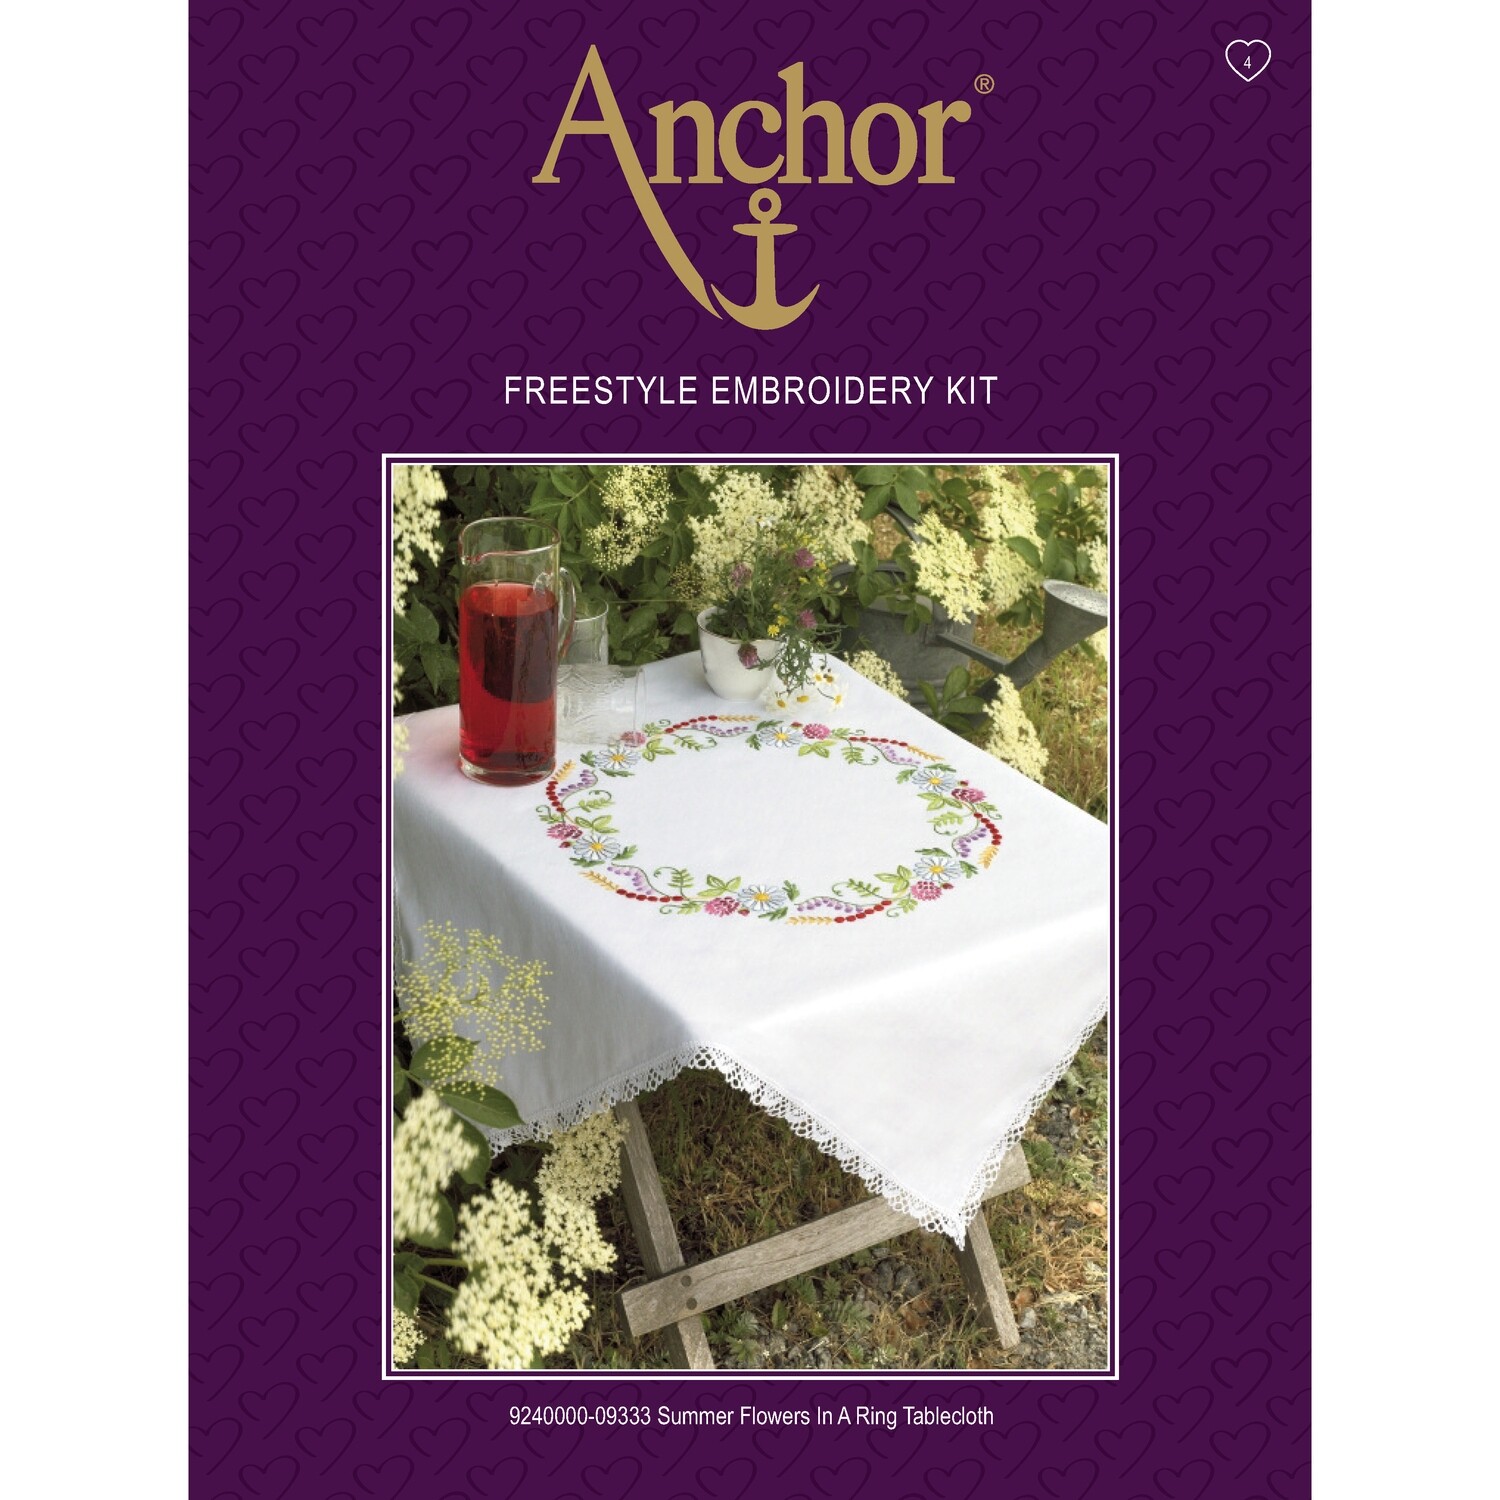 Anchor Essentials Freestyle Kit - Summer Flowers Tablecloth